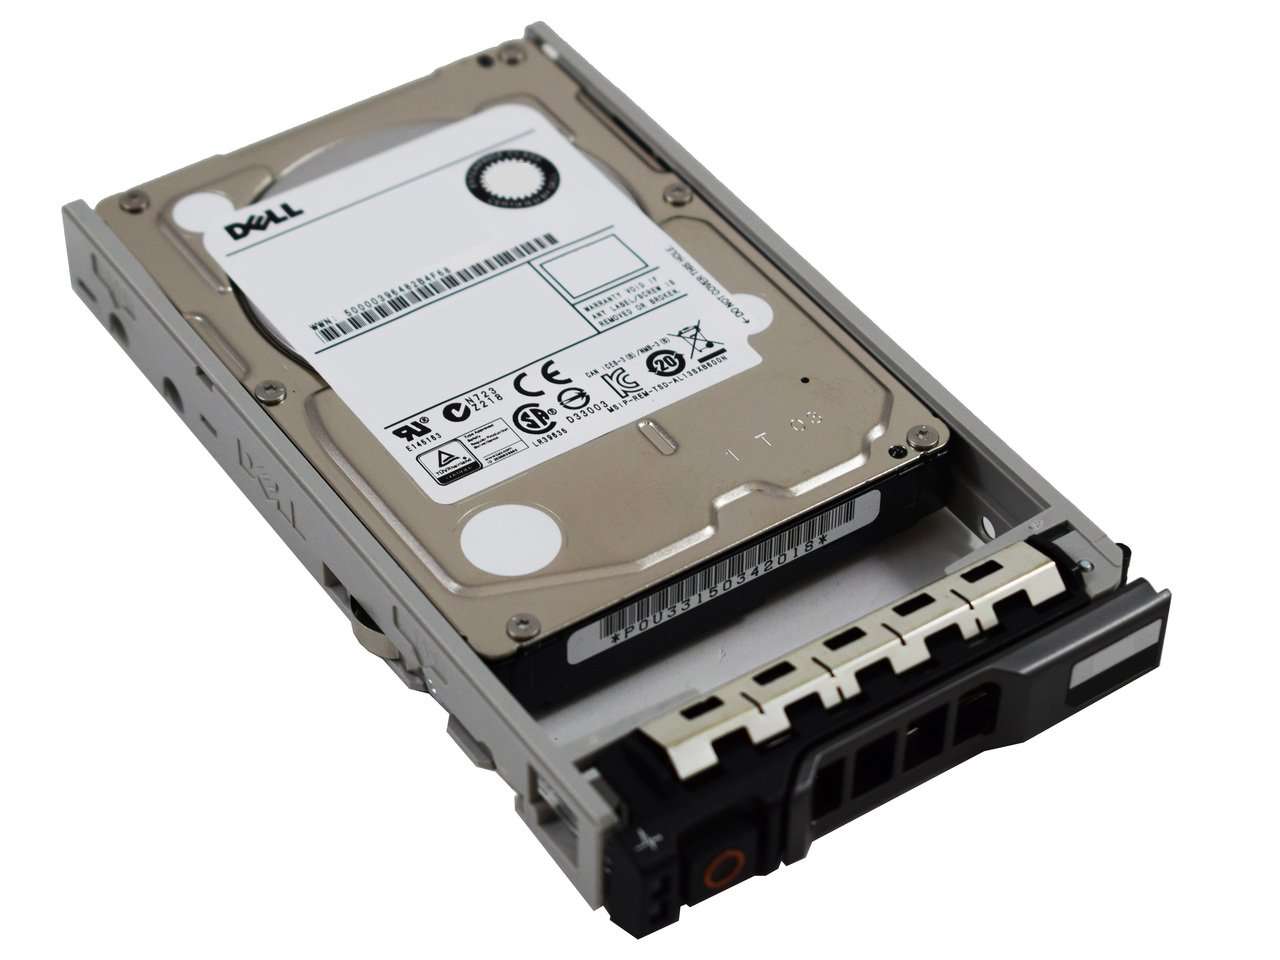 Dell G13 VT40R 600GB 15K RPM SAS 6Gb/s 512n 2.5" Manufacturer Recertified HDD